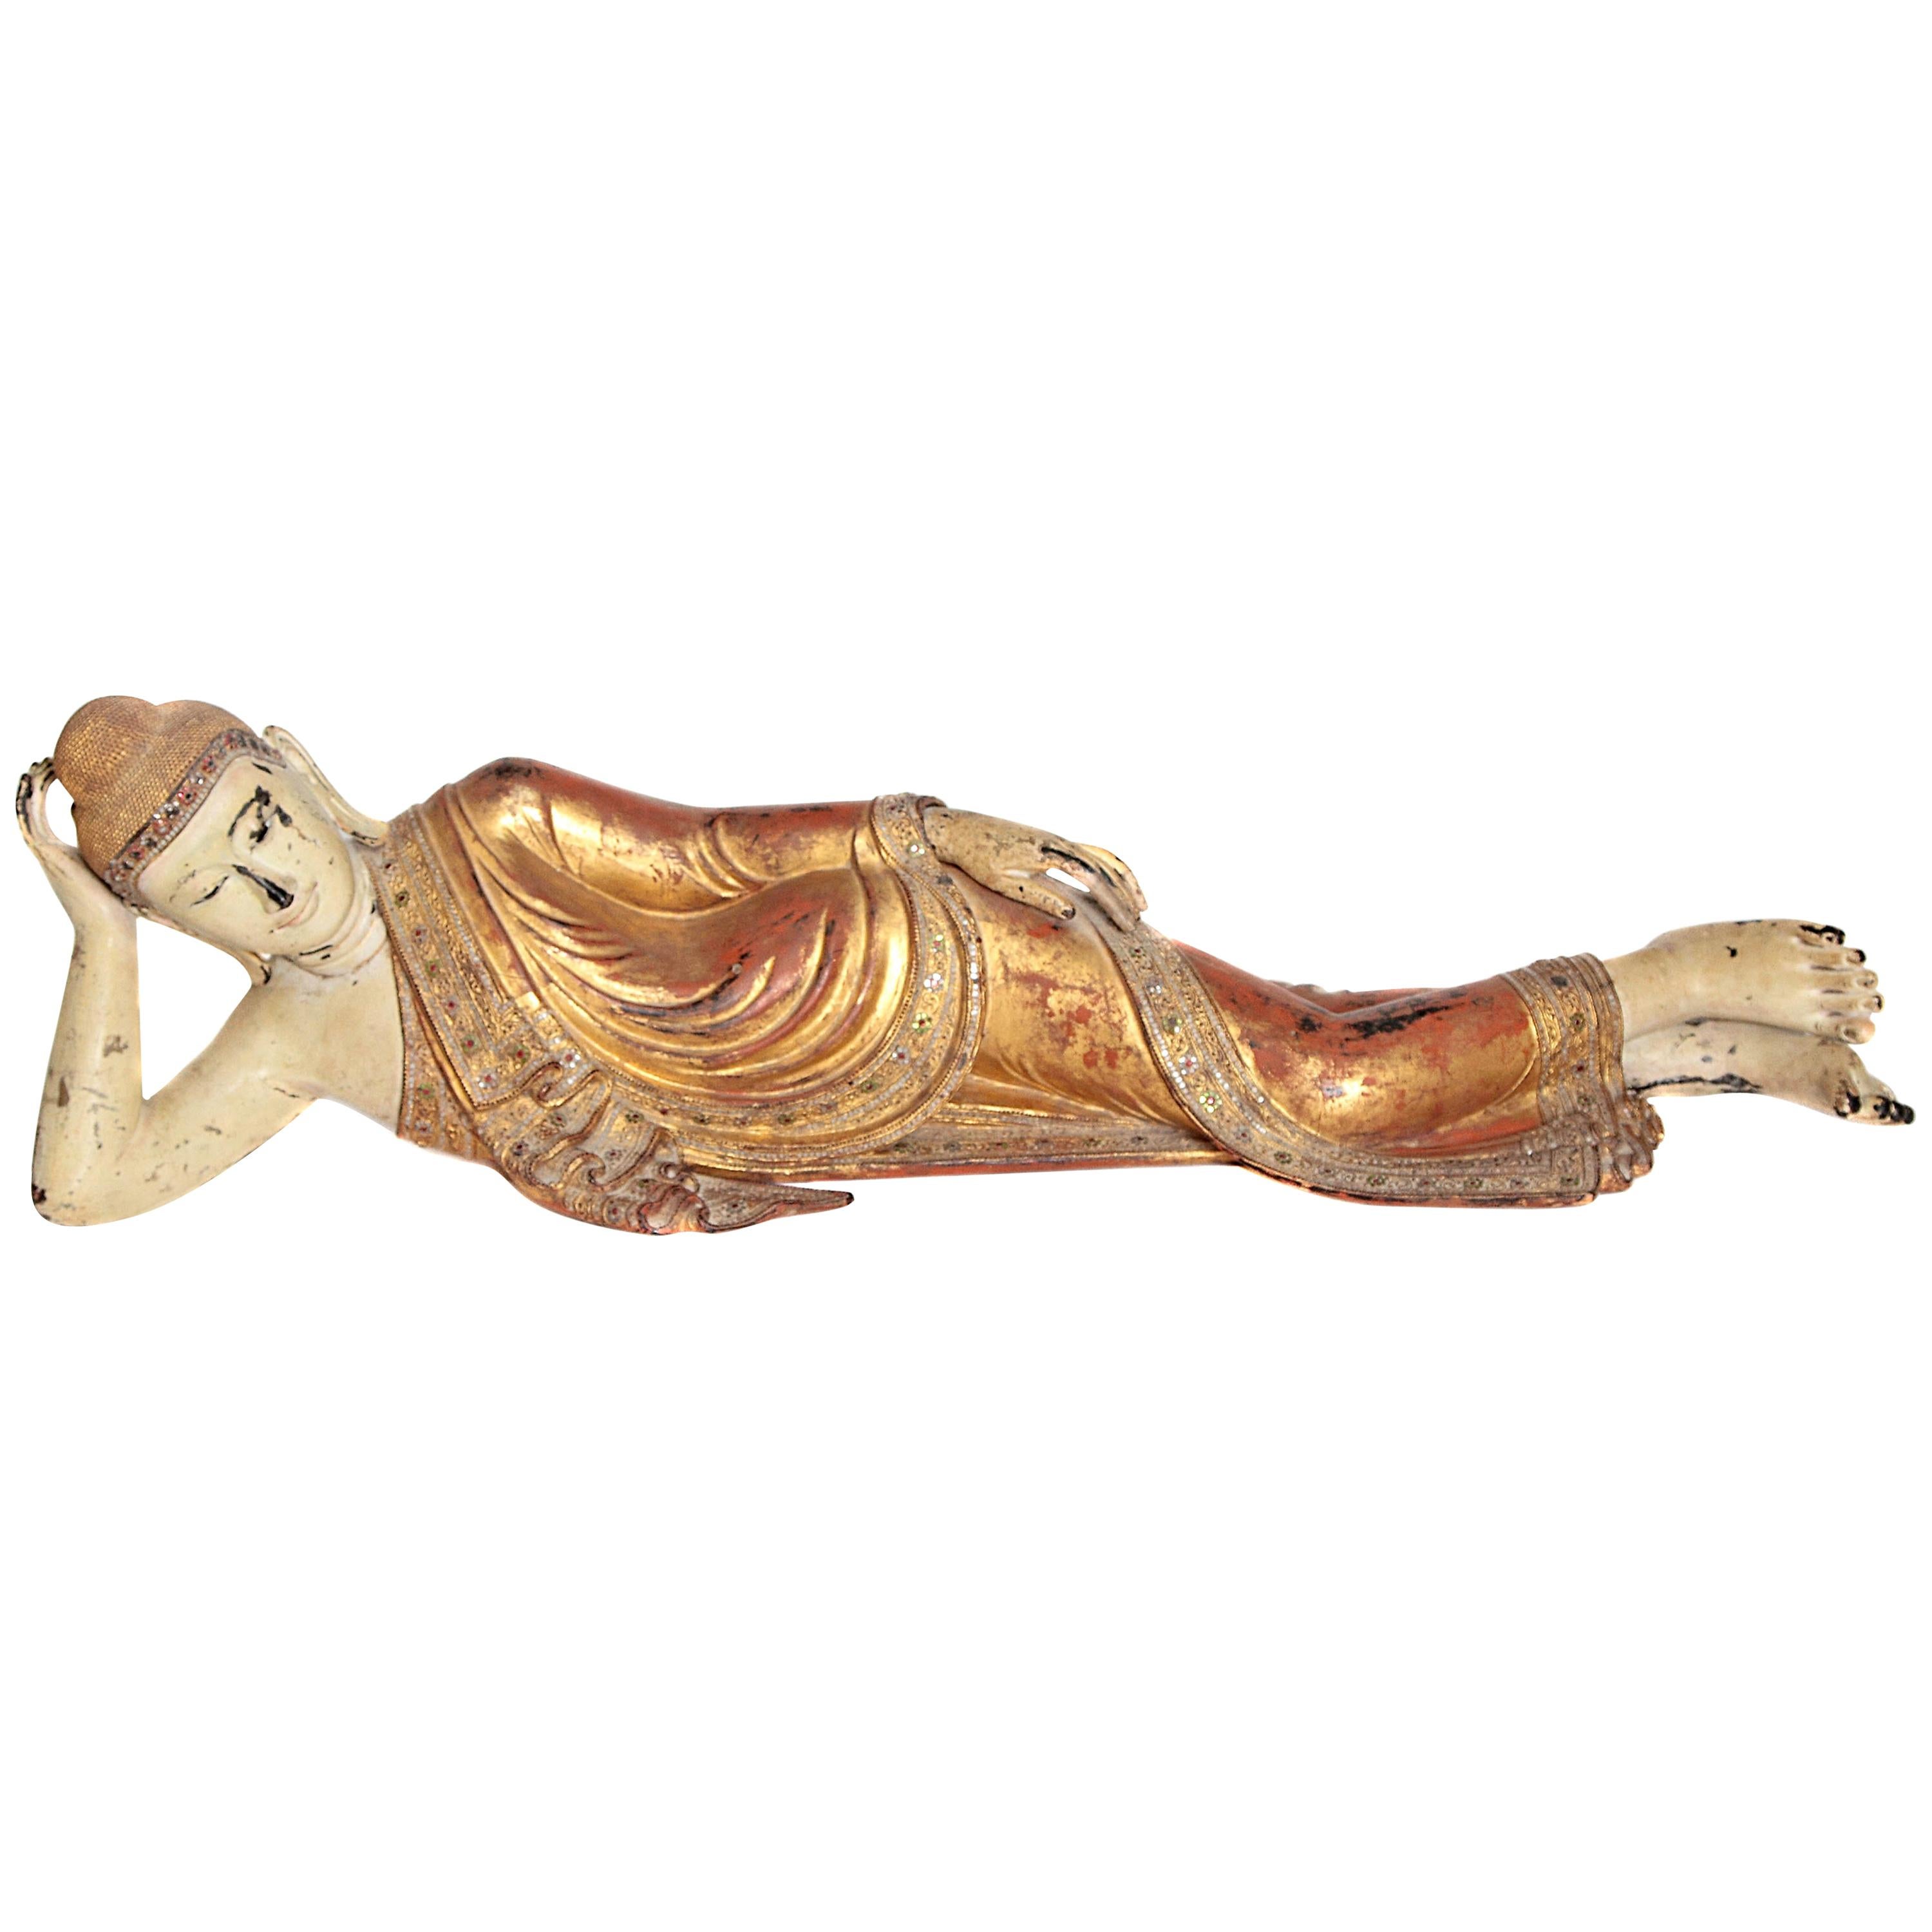 Reclining Buddha or Draped in Golden Robes with a Jeweled Border and Headress